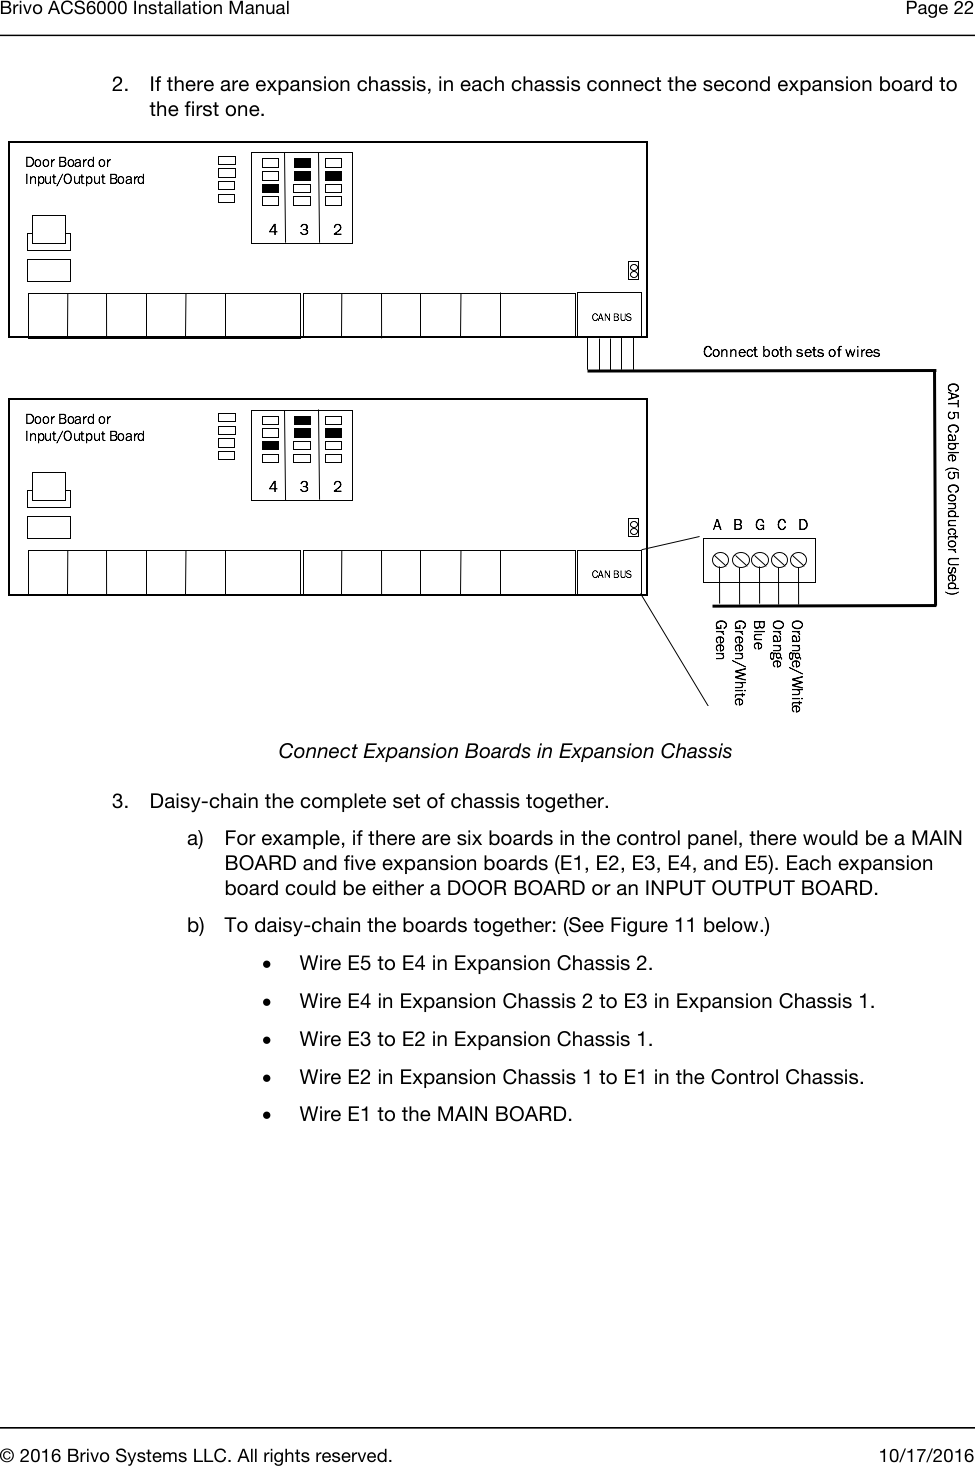 Brivo ACS6000 Installation Manual Page 22       © 2016 Brivo Systems LLC. All rights reserved. 10/17/2016  2. If there are expansion chassis, in each chassis connect the second expansion board to the first one.  Connect Expansion Boards in Expansion Chassis 3. Daisy-chain the complete set of chassis together. a) For example, if there are six boards in the control panel, there would be a MAIN BOARD and five expansion boards (E1, E2, E3, E4, and E5). Each expansion board could be either a DOOR BOARD or an INPUT OUTPUT BOARD.  b) To daisy-chain the boards together: (See Figure 11 below.) • Wire E5 to E4 in Expansion Chassis 2. • Wire E4 in Expansion Chassis 2 to E3 in Expansion Chassis 1. • Wire E3 to E2 in Expansion Chassis 1. • Wire E2 in Expansion Chassis 1 to E1 in the Control Chassis. • Wire E1 to the MAIN BOARD.  